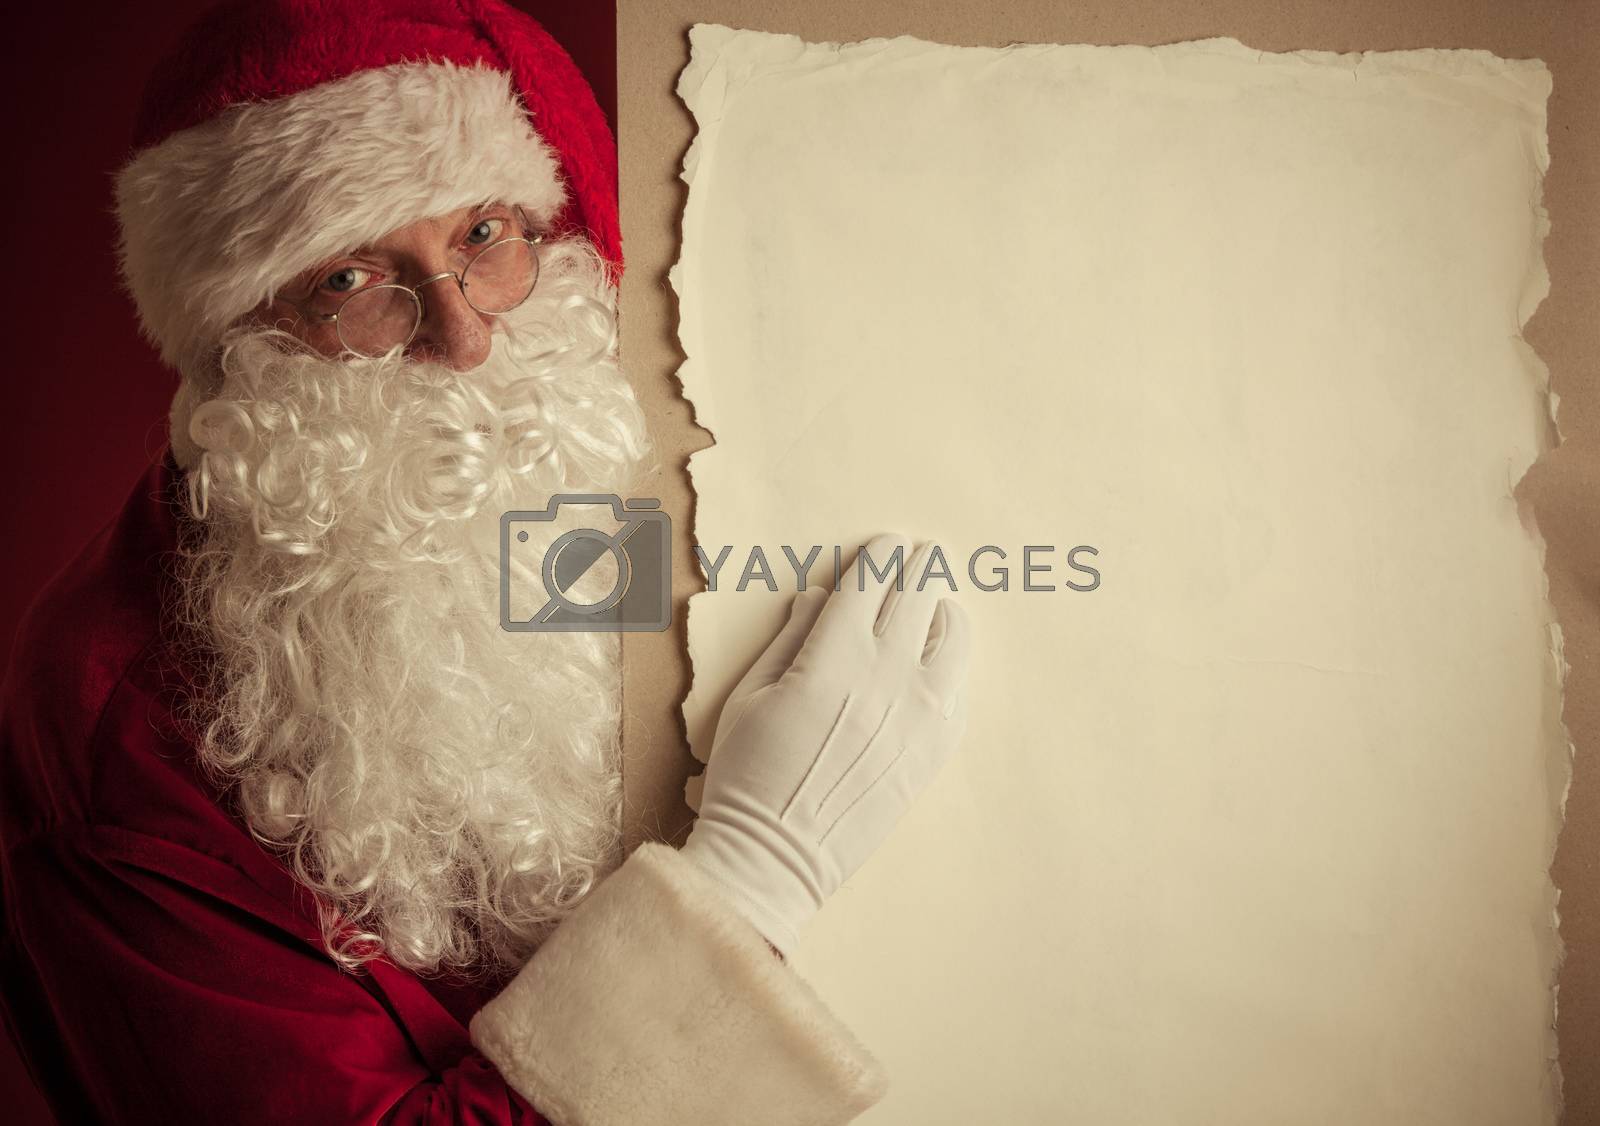 Royalty free image of Santa Claus with vintage paper by ALotOfPeople